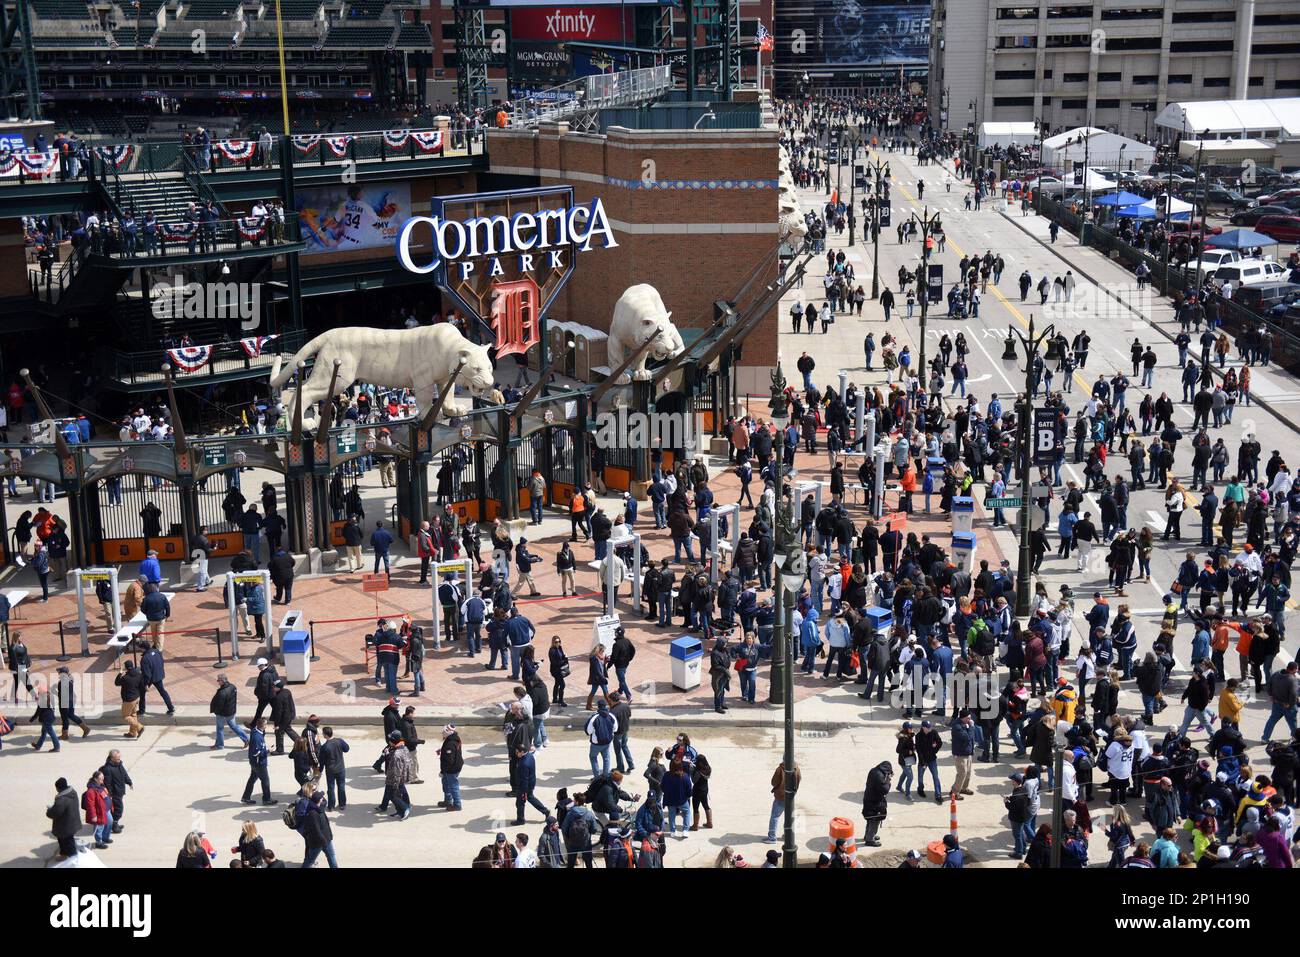 What to know about Tigers Opening Day in downtown Detroit